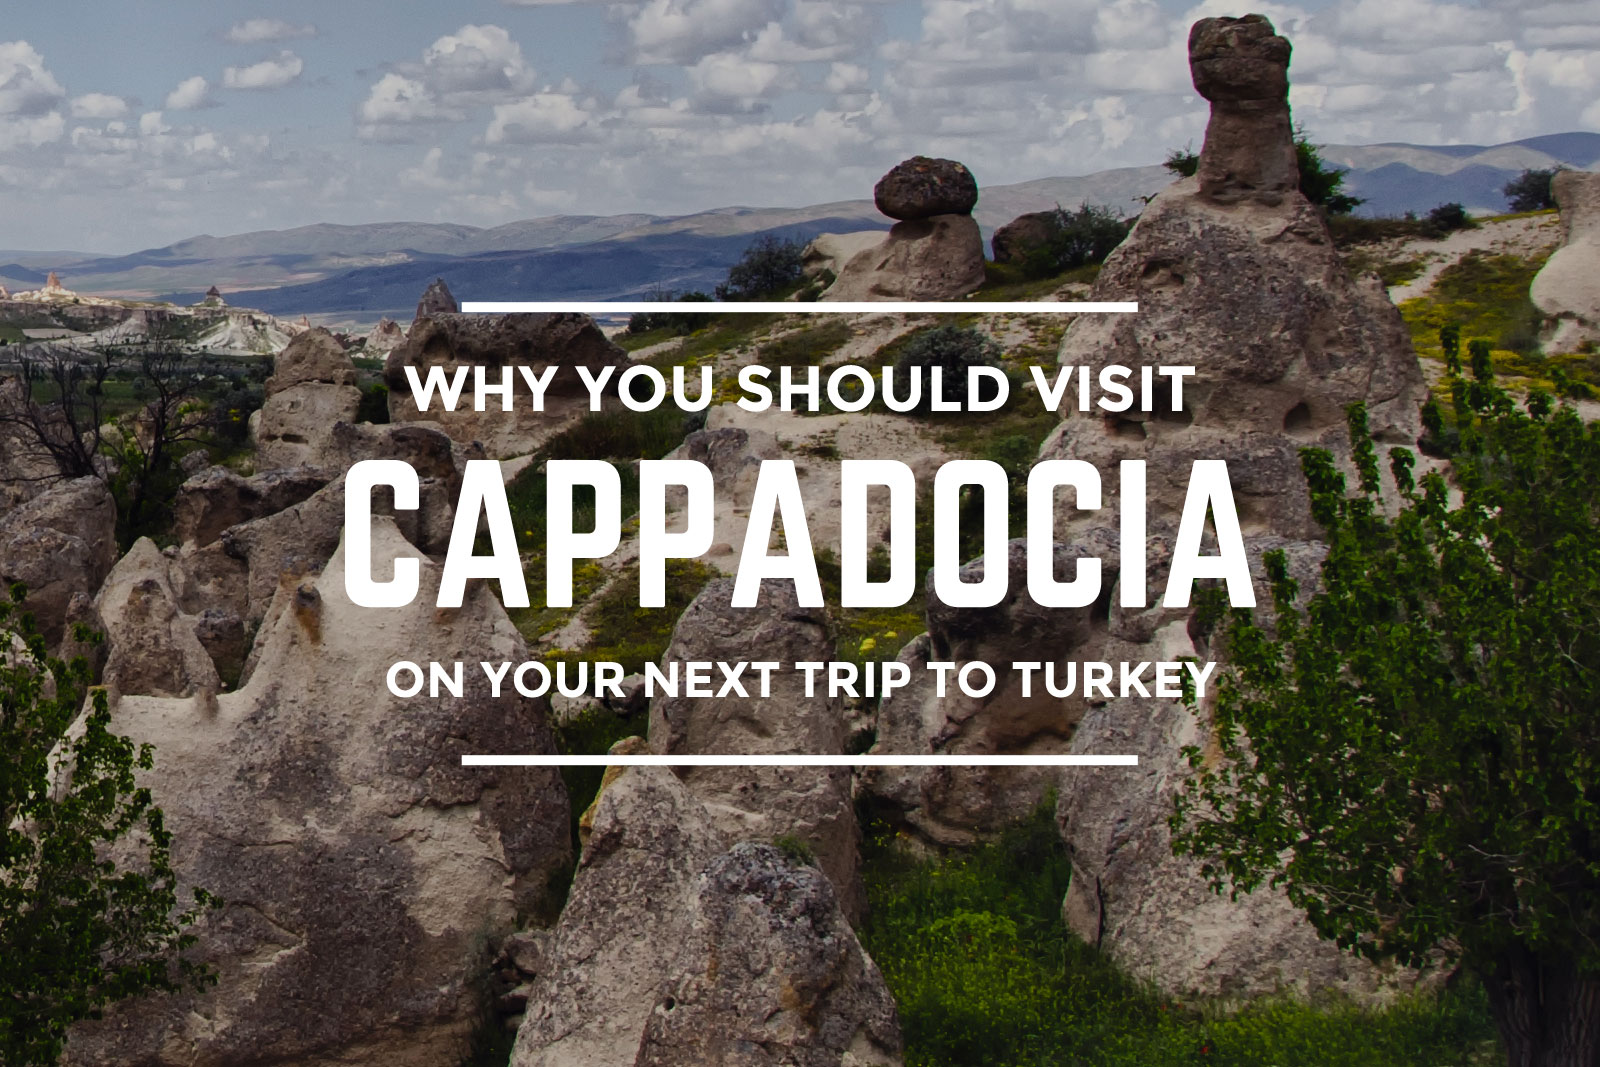 Why You Should Visit Cappadocia On Your Next Trip to Turkey